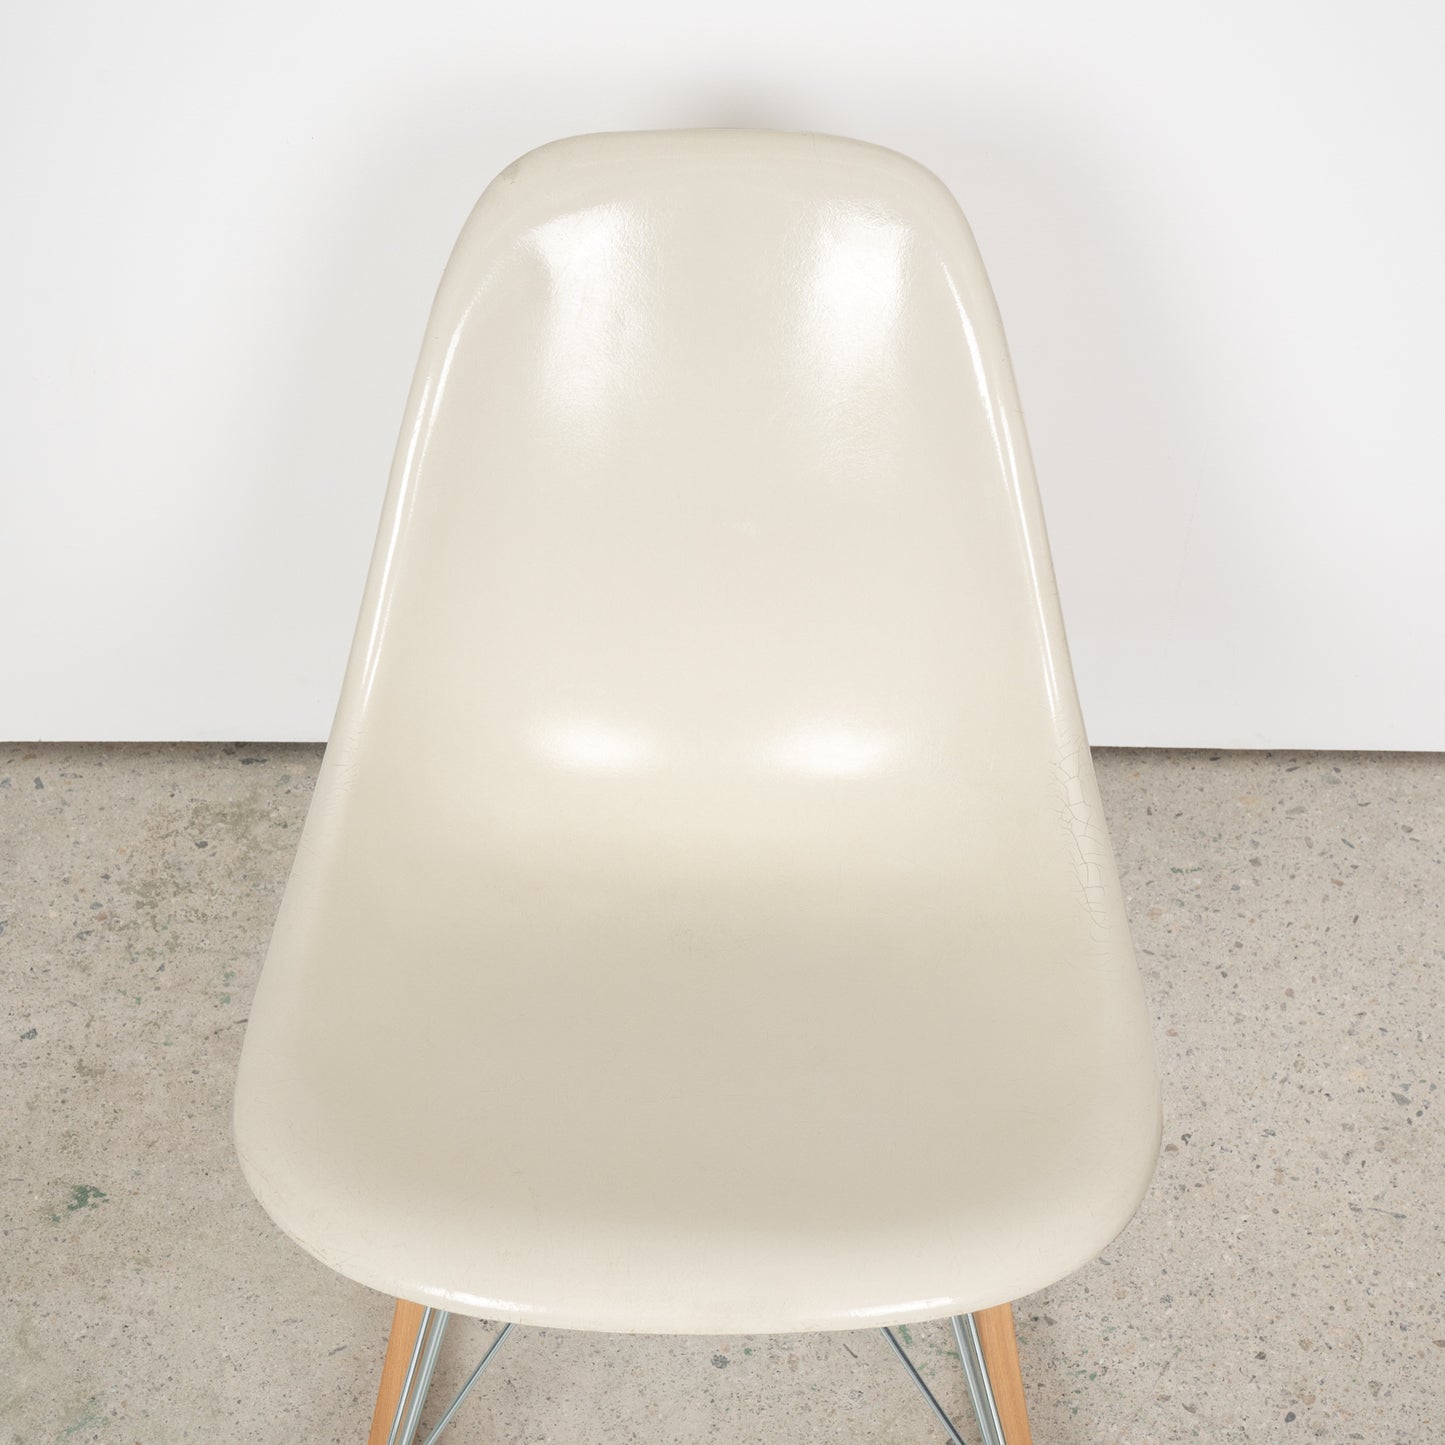 (LOT 21) RSR Chair (Parchment) by Charles & Ray Eames